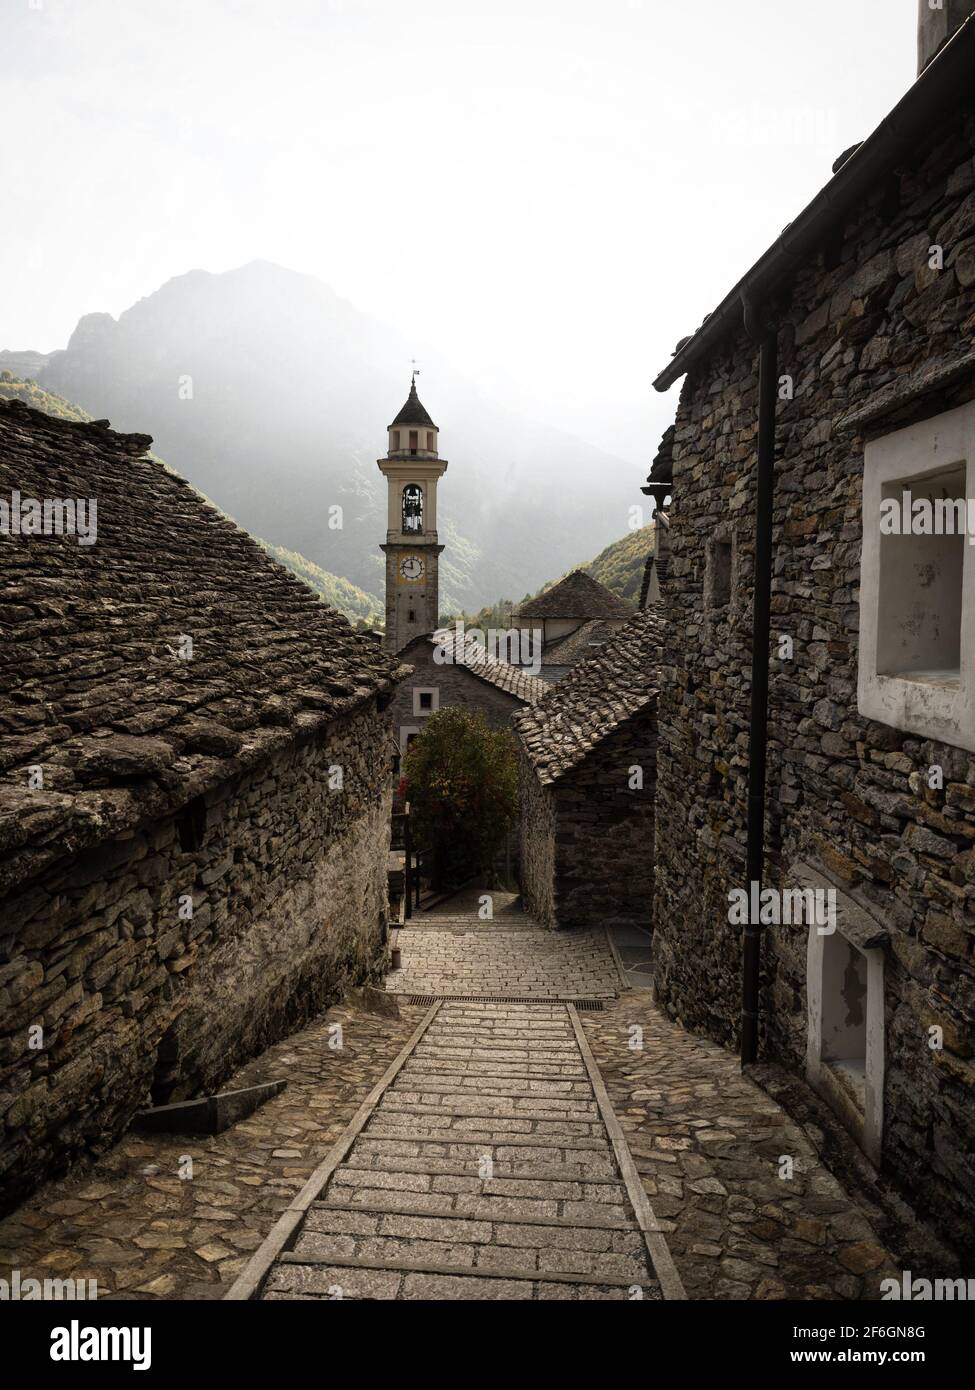 Panorama view of old historic traditional schist stone rock building church clock bell tower in picturesque quaint charming village Sonogno Verzasca V Stock Photo